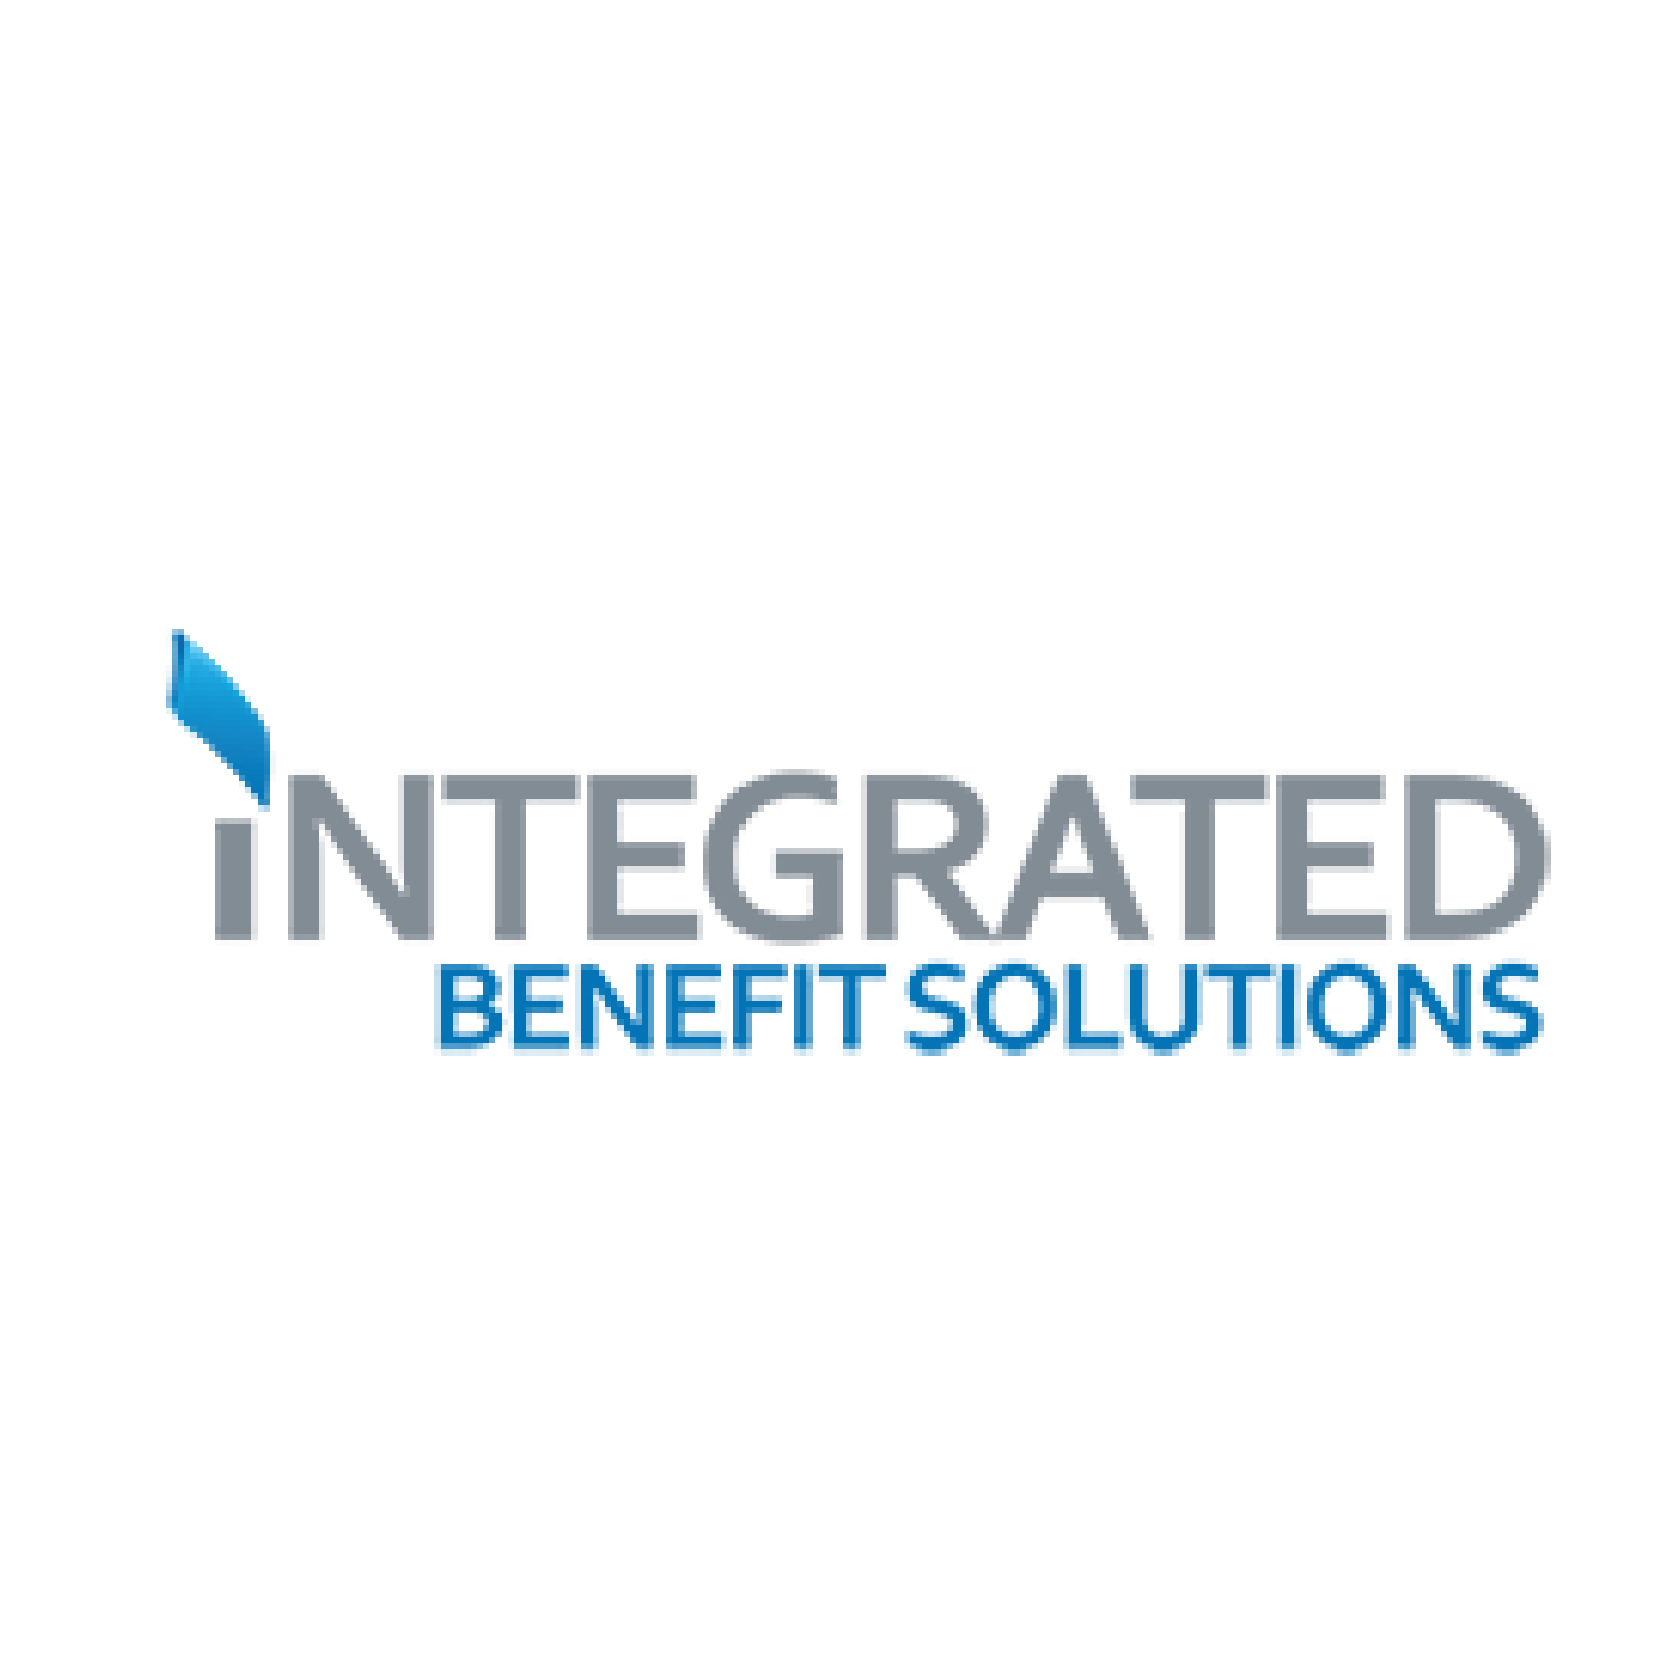 Integrated Benefit Solutions